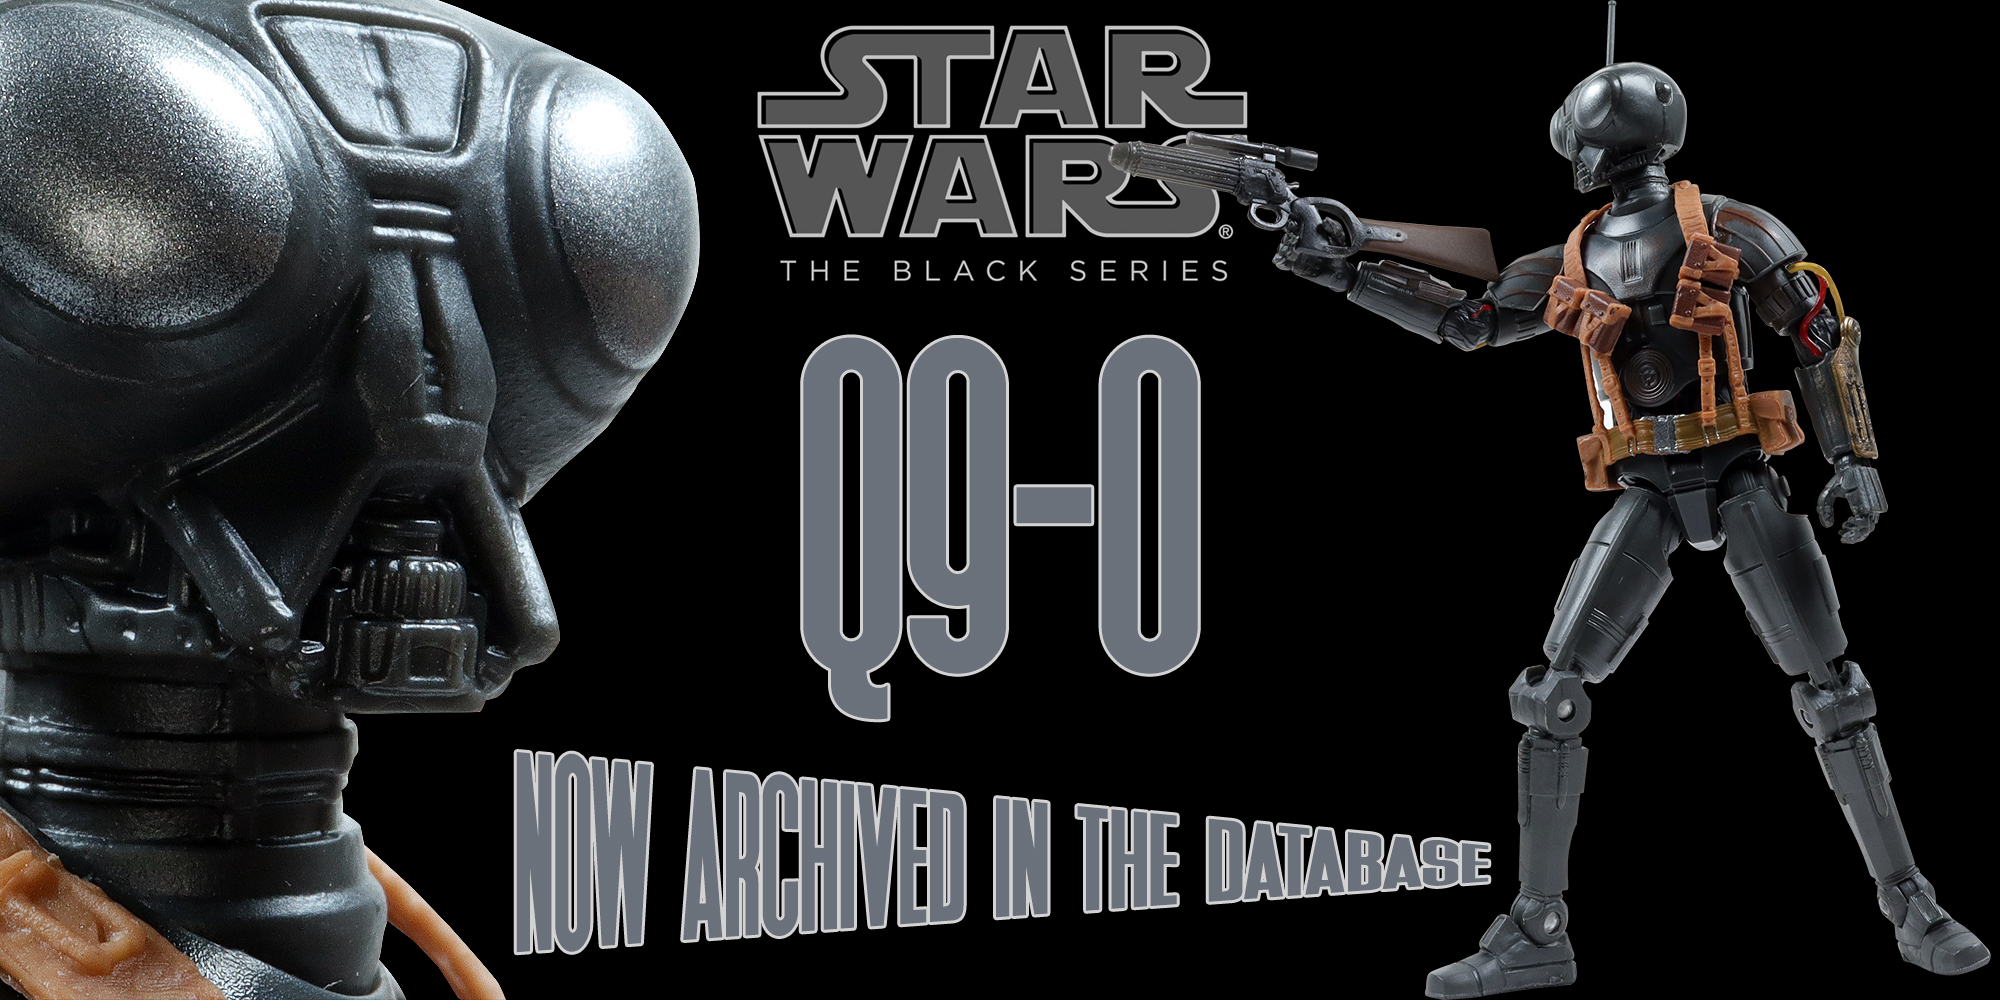 Black Series Q9-0 Now Archived